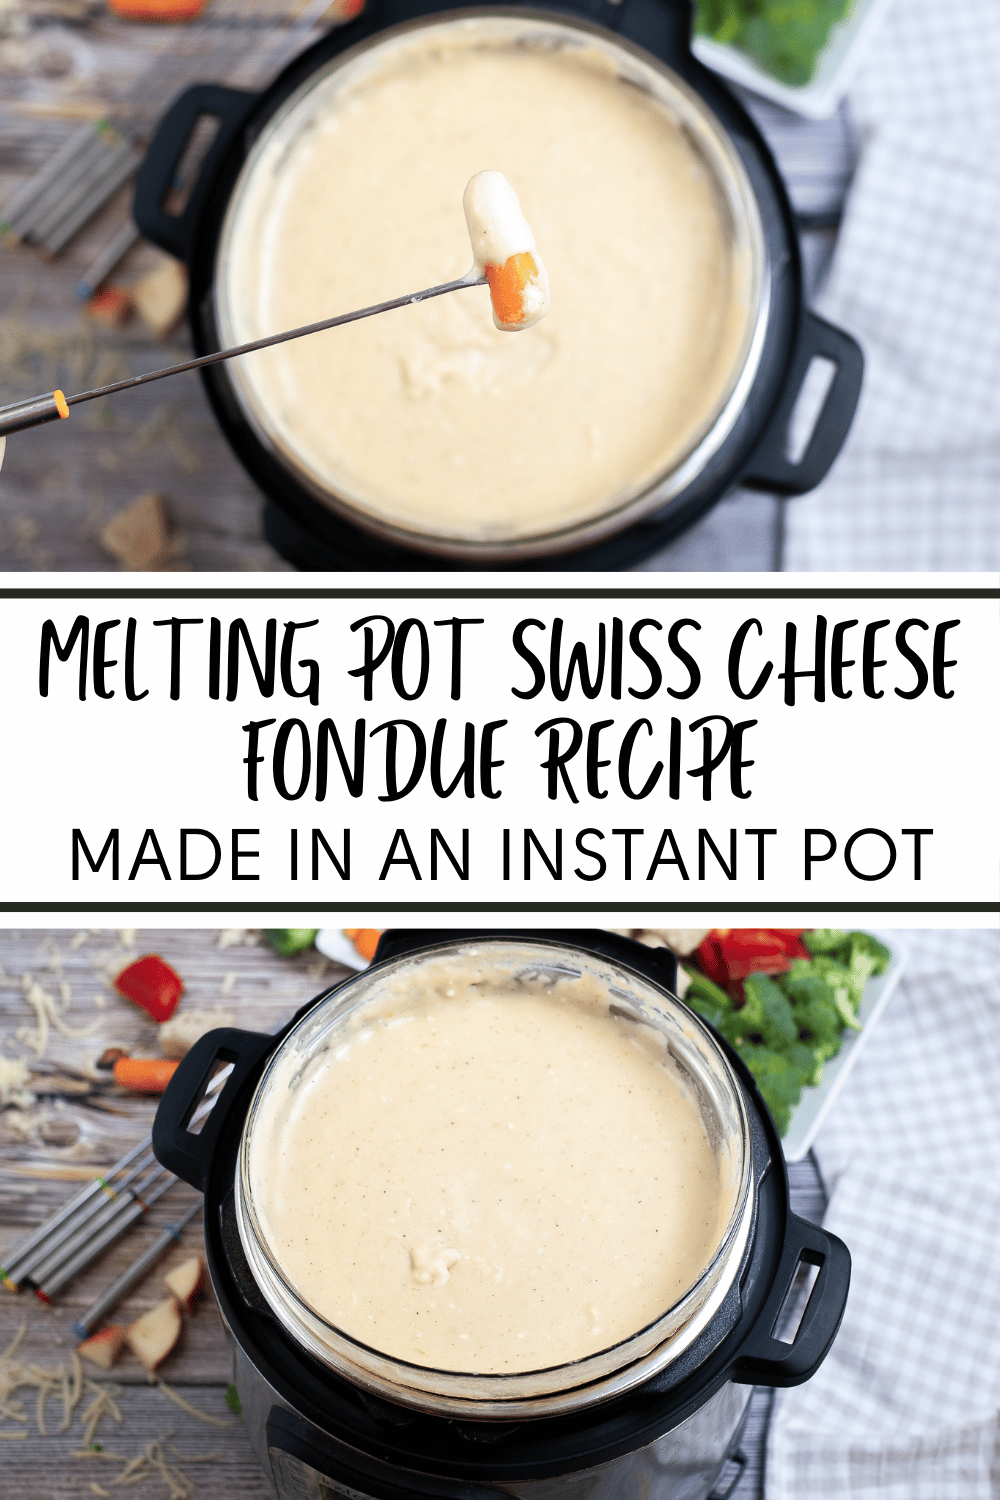 This Melting Pot Swiss Cheese Fondue Recipe is a classic, easy-to-make fondue perfect for any party! It can be made in the Instant Pot. #cheesefondue #instantpot #pressurecooker #fonduerecipe via @wondermomwannab